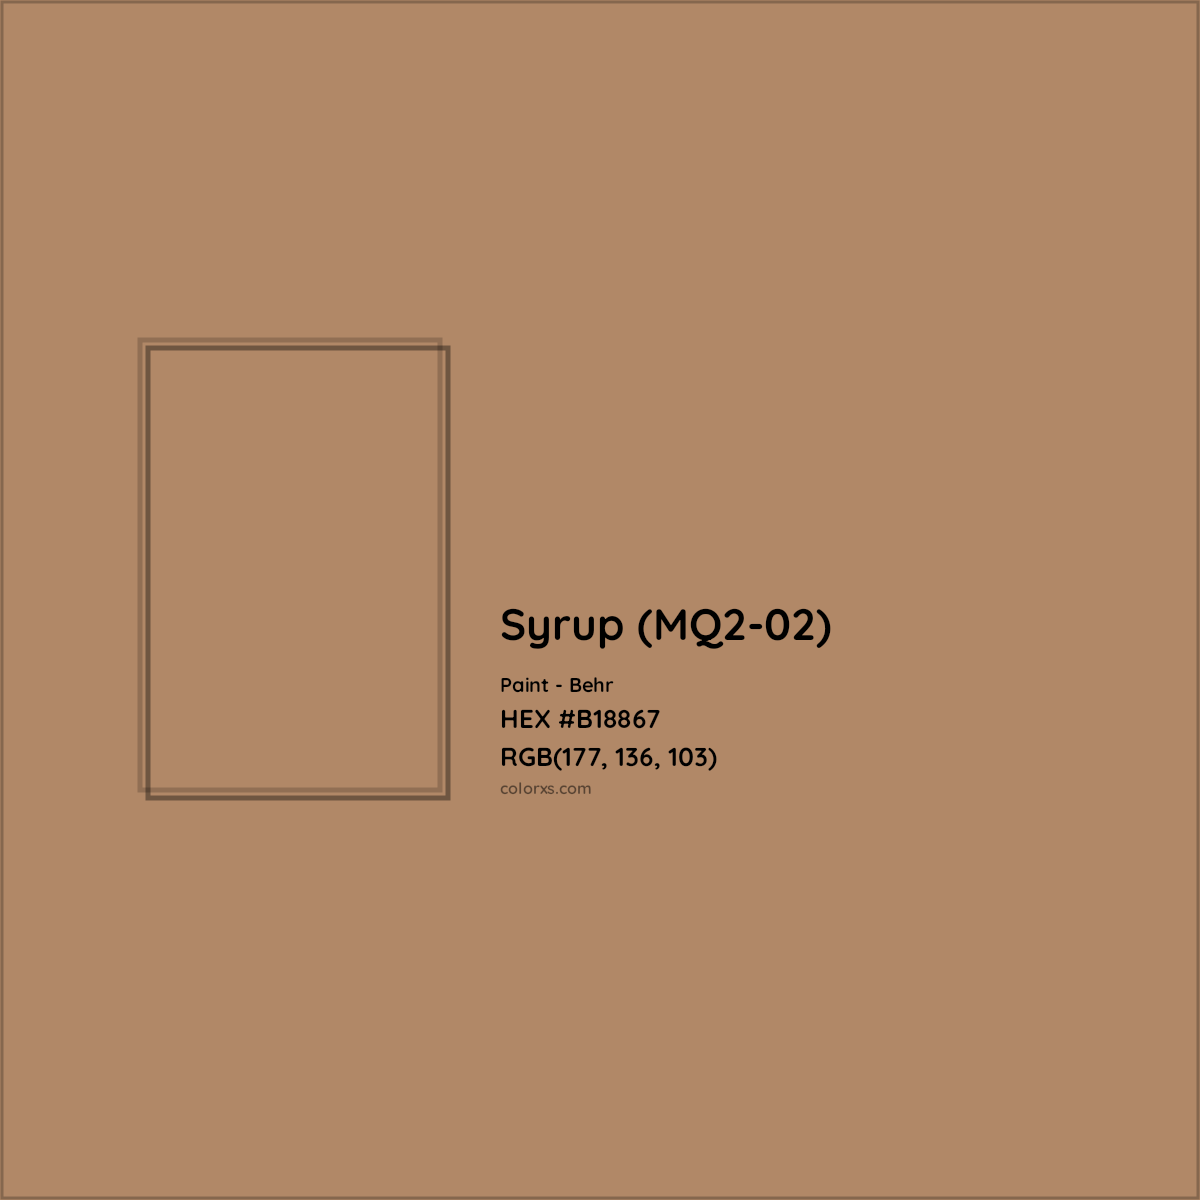 HEX #B18867 Syrup (MQ2-02) Paint Behr - Color Code